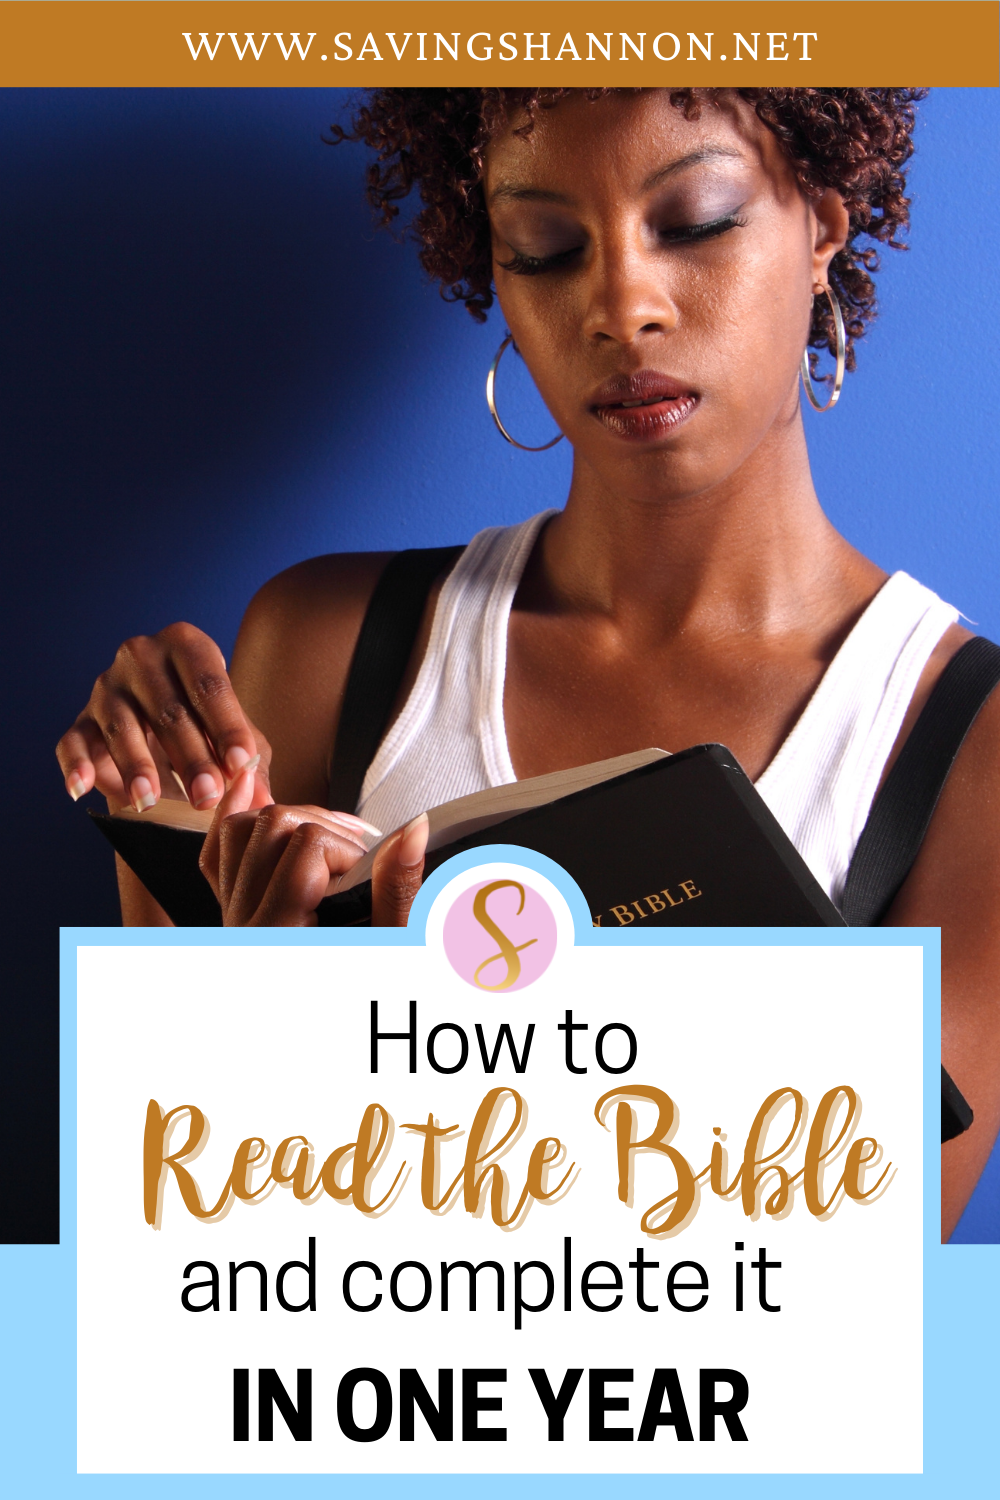 How to read the bible in a year HT.png